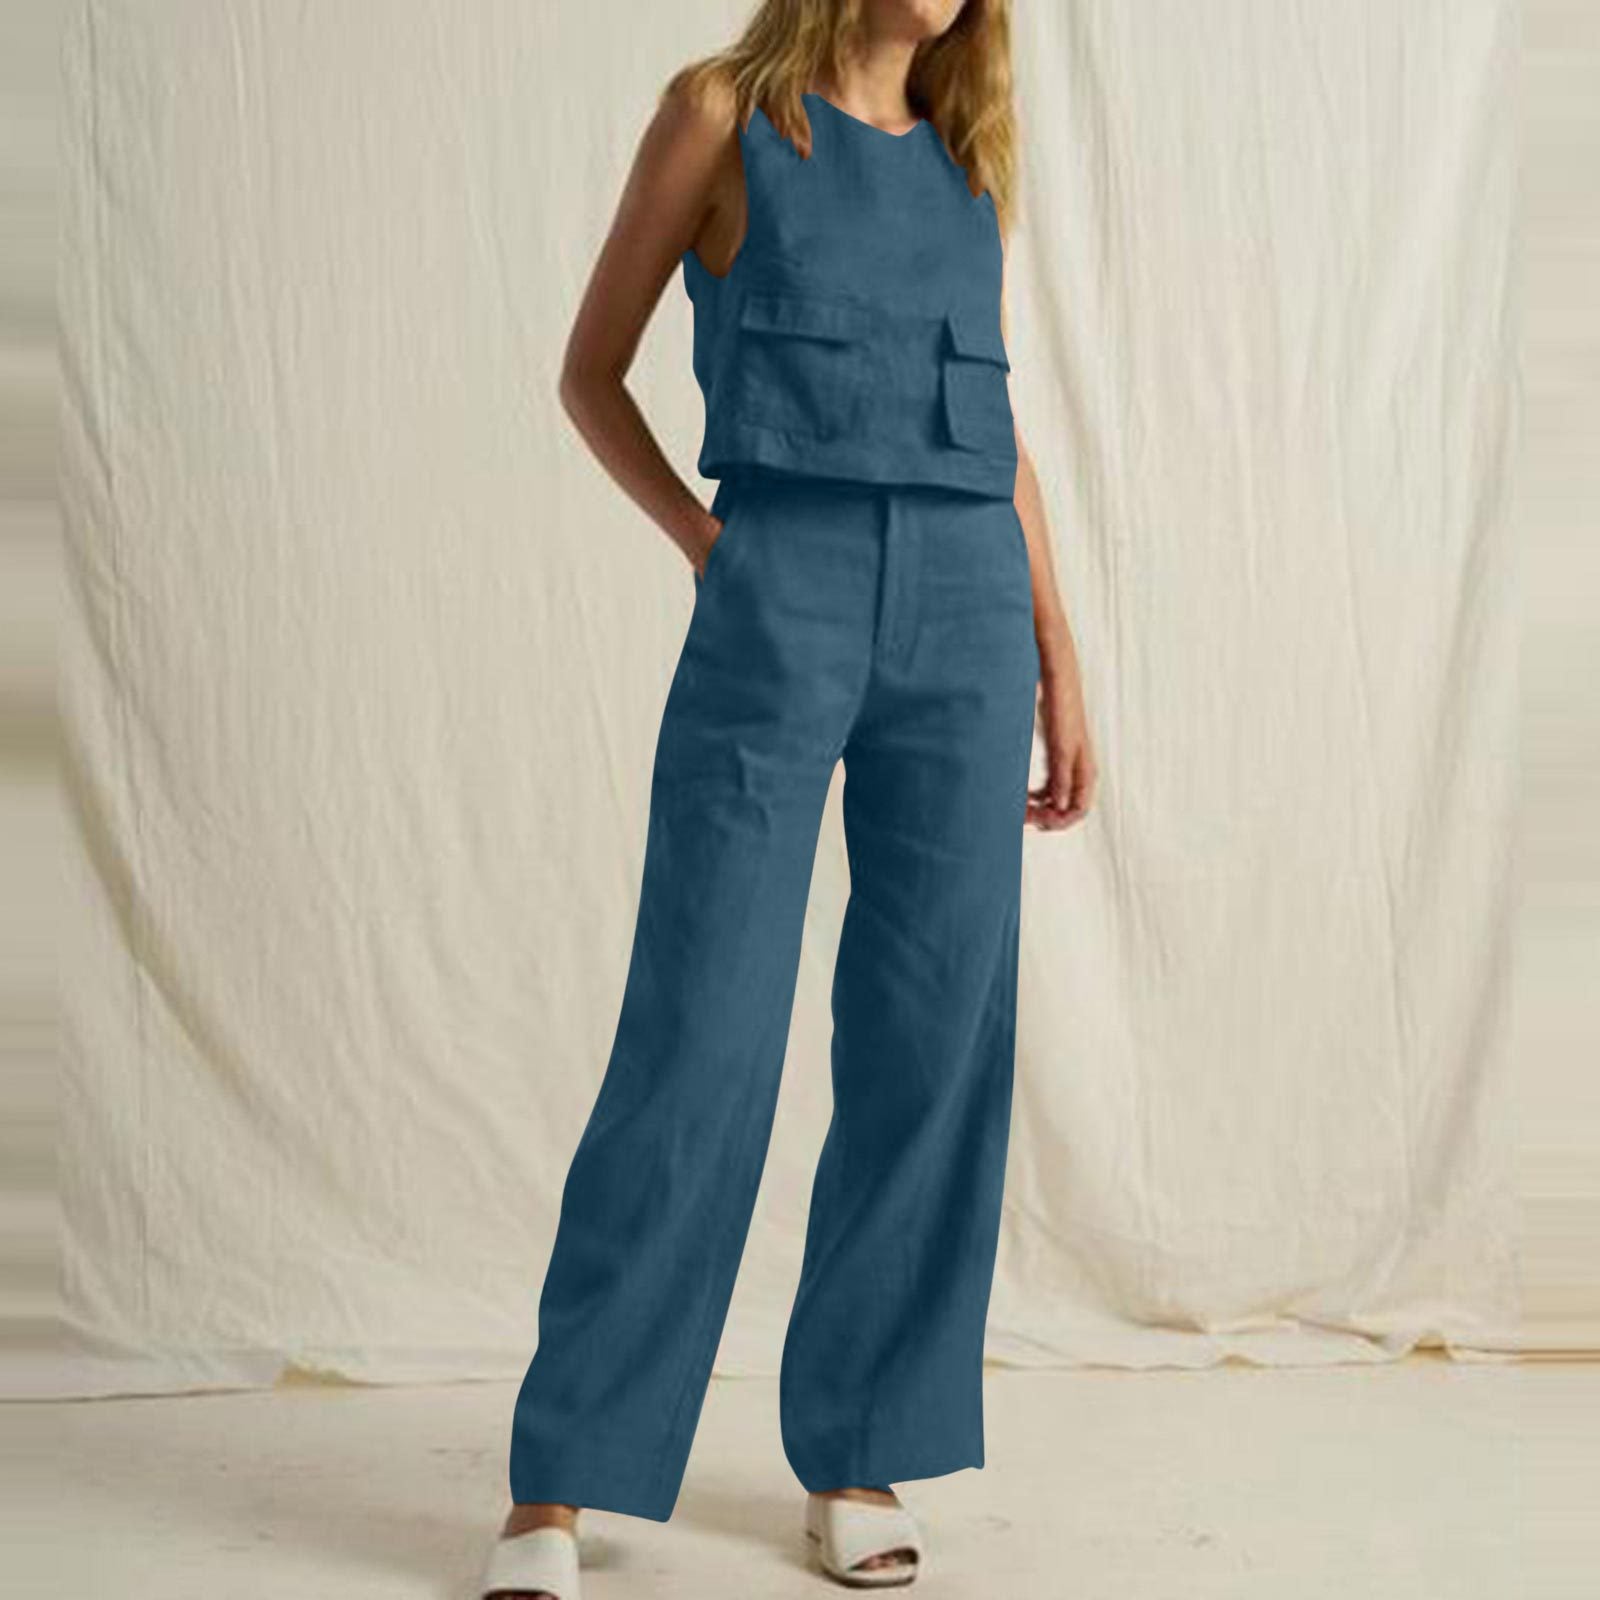 NTG Fad SUIT sea blue / S Sleeveless pocket trousers casual suit